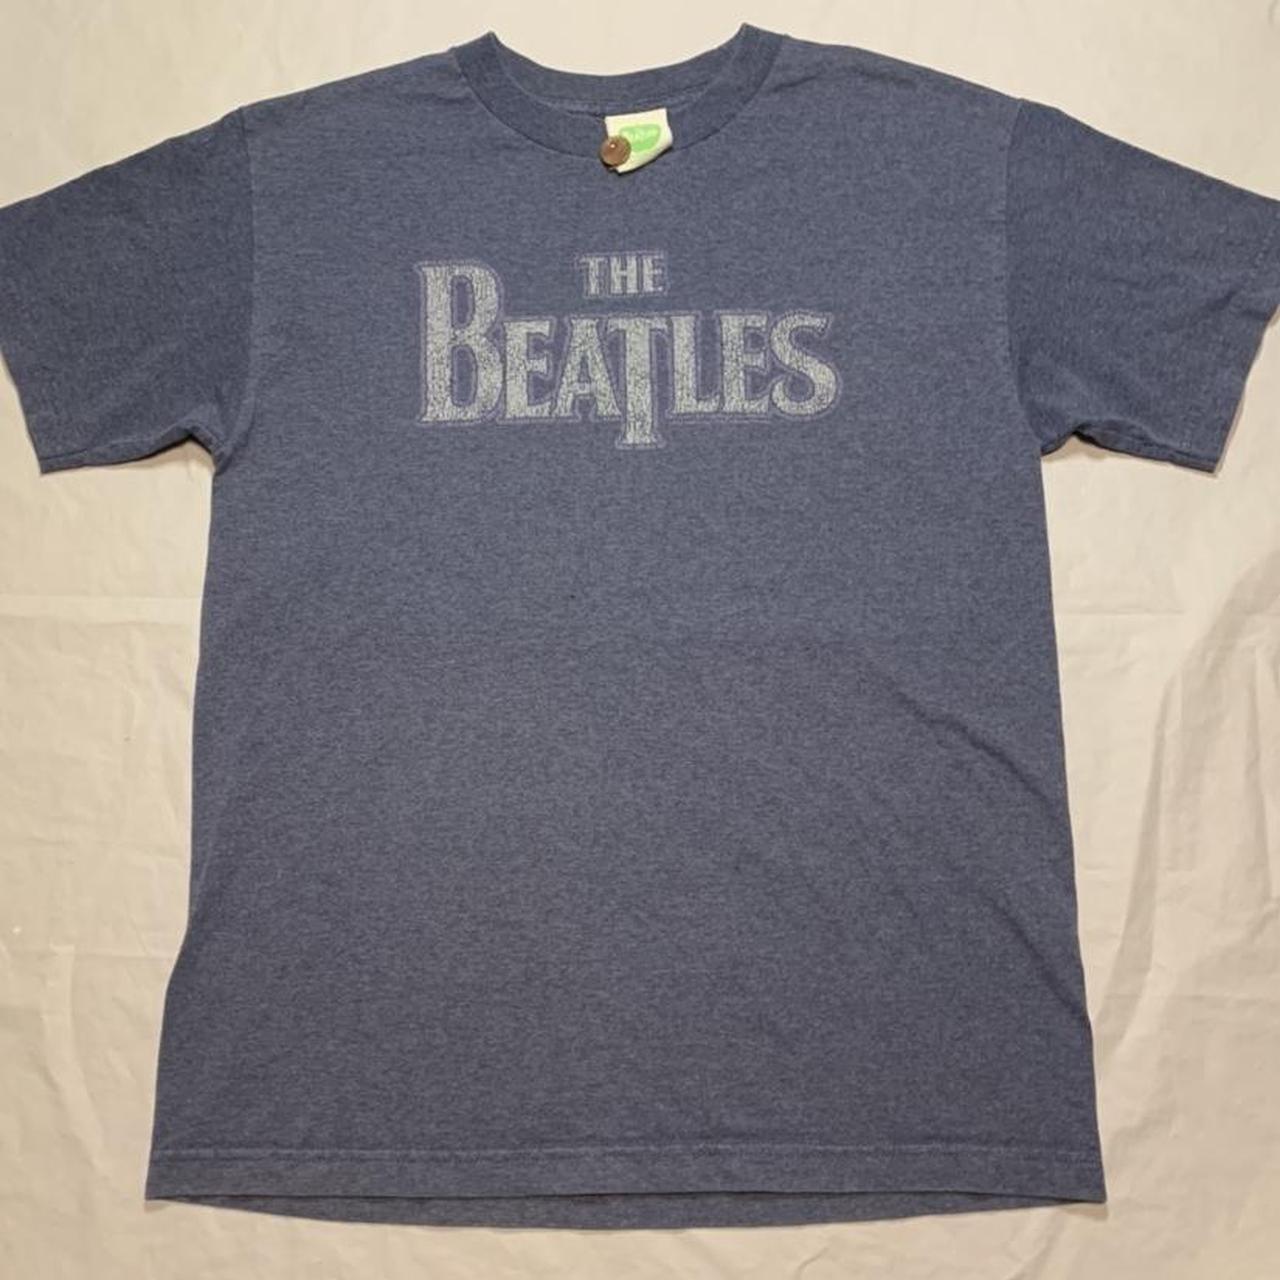 Product Image 1 - The Beatles Tee 2005 

Size: